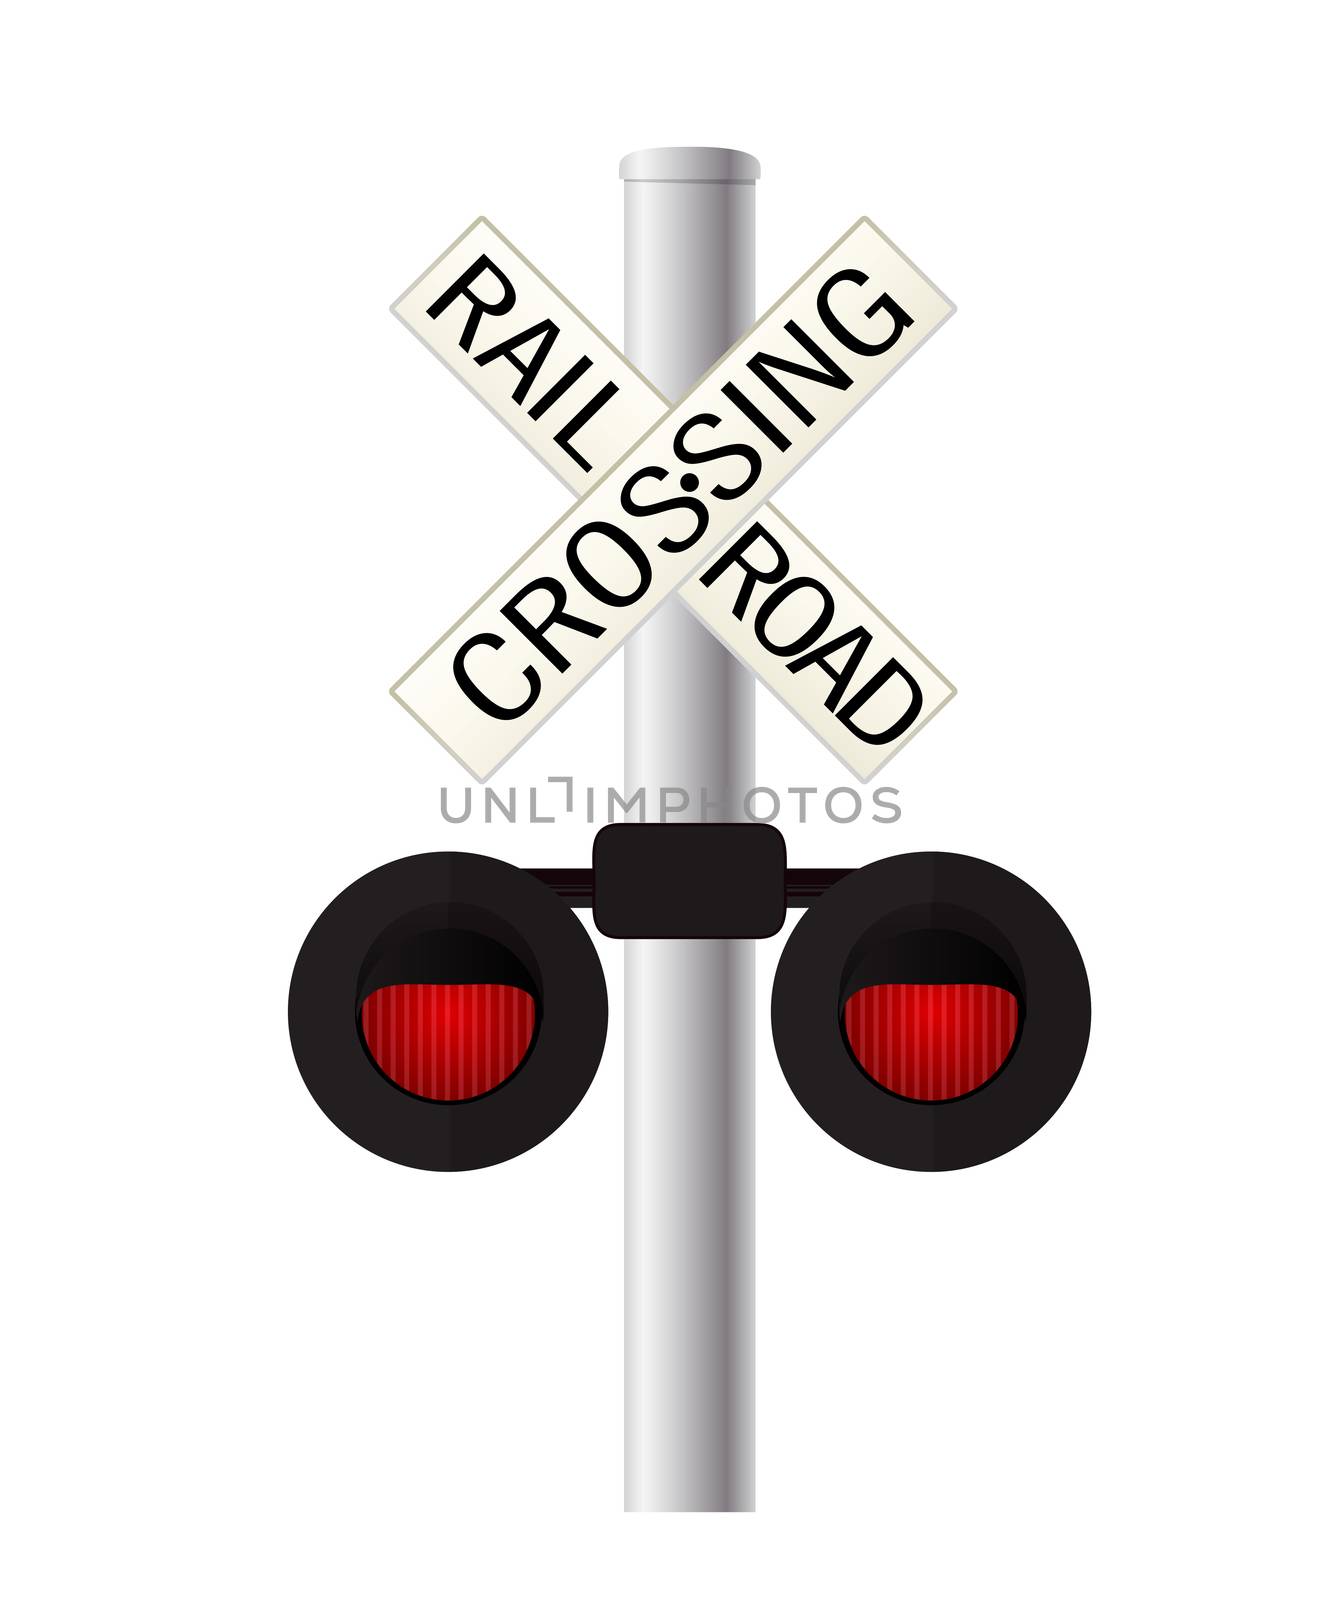 Railroad crossing sign by Lirch